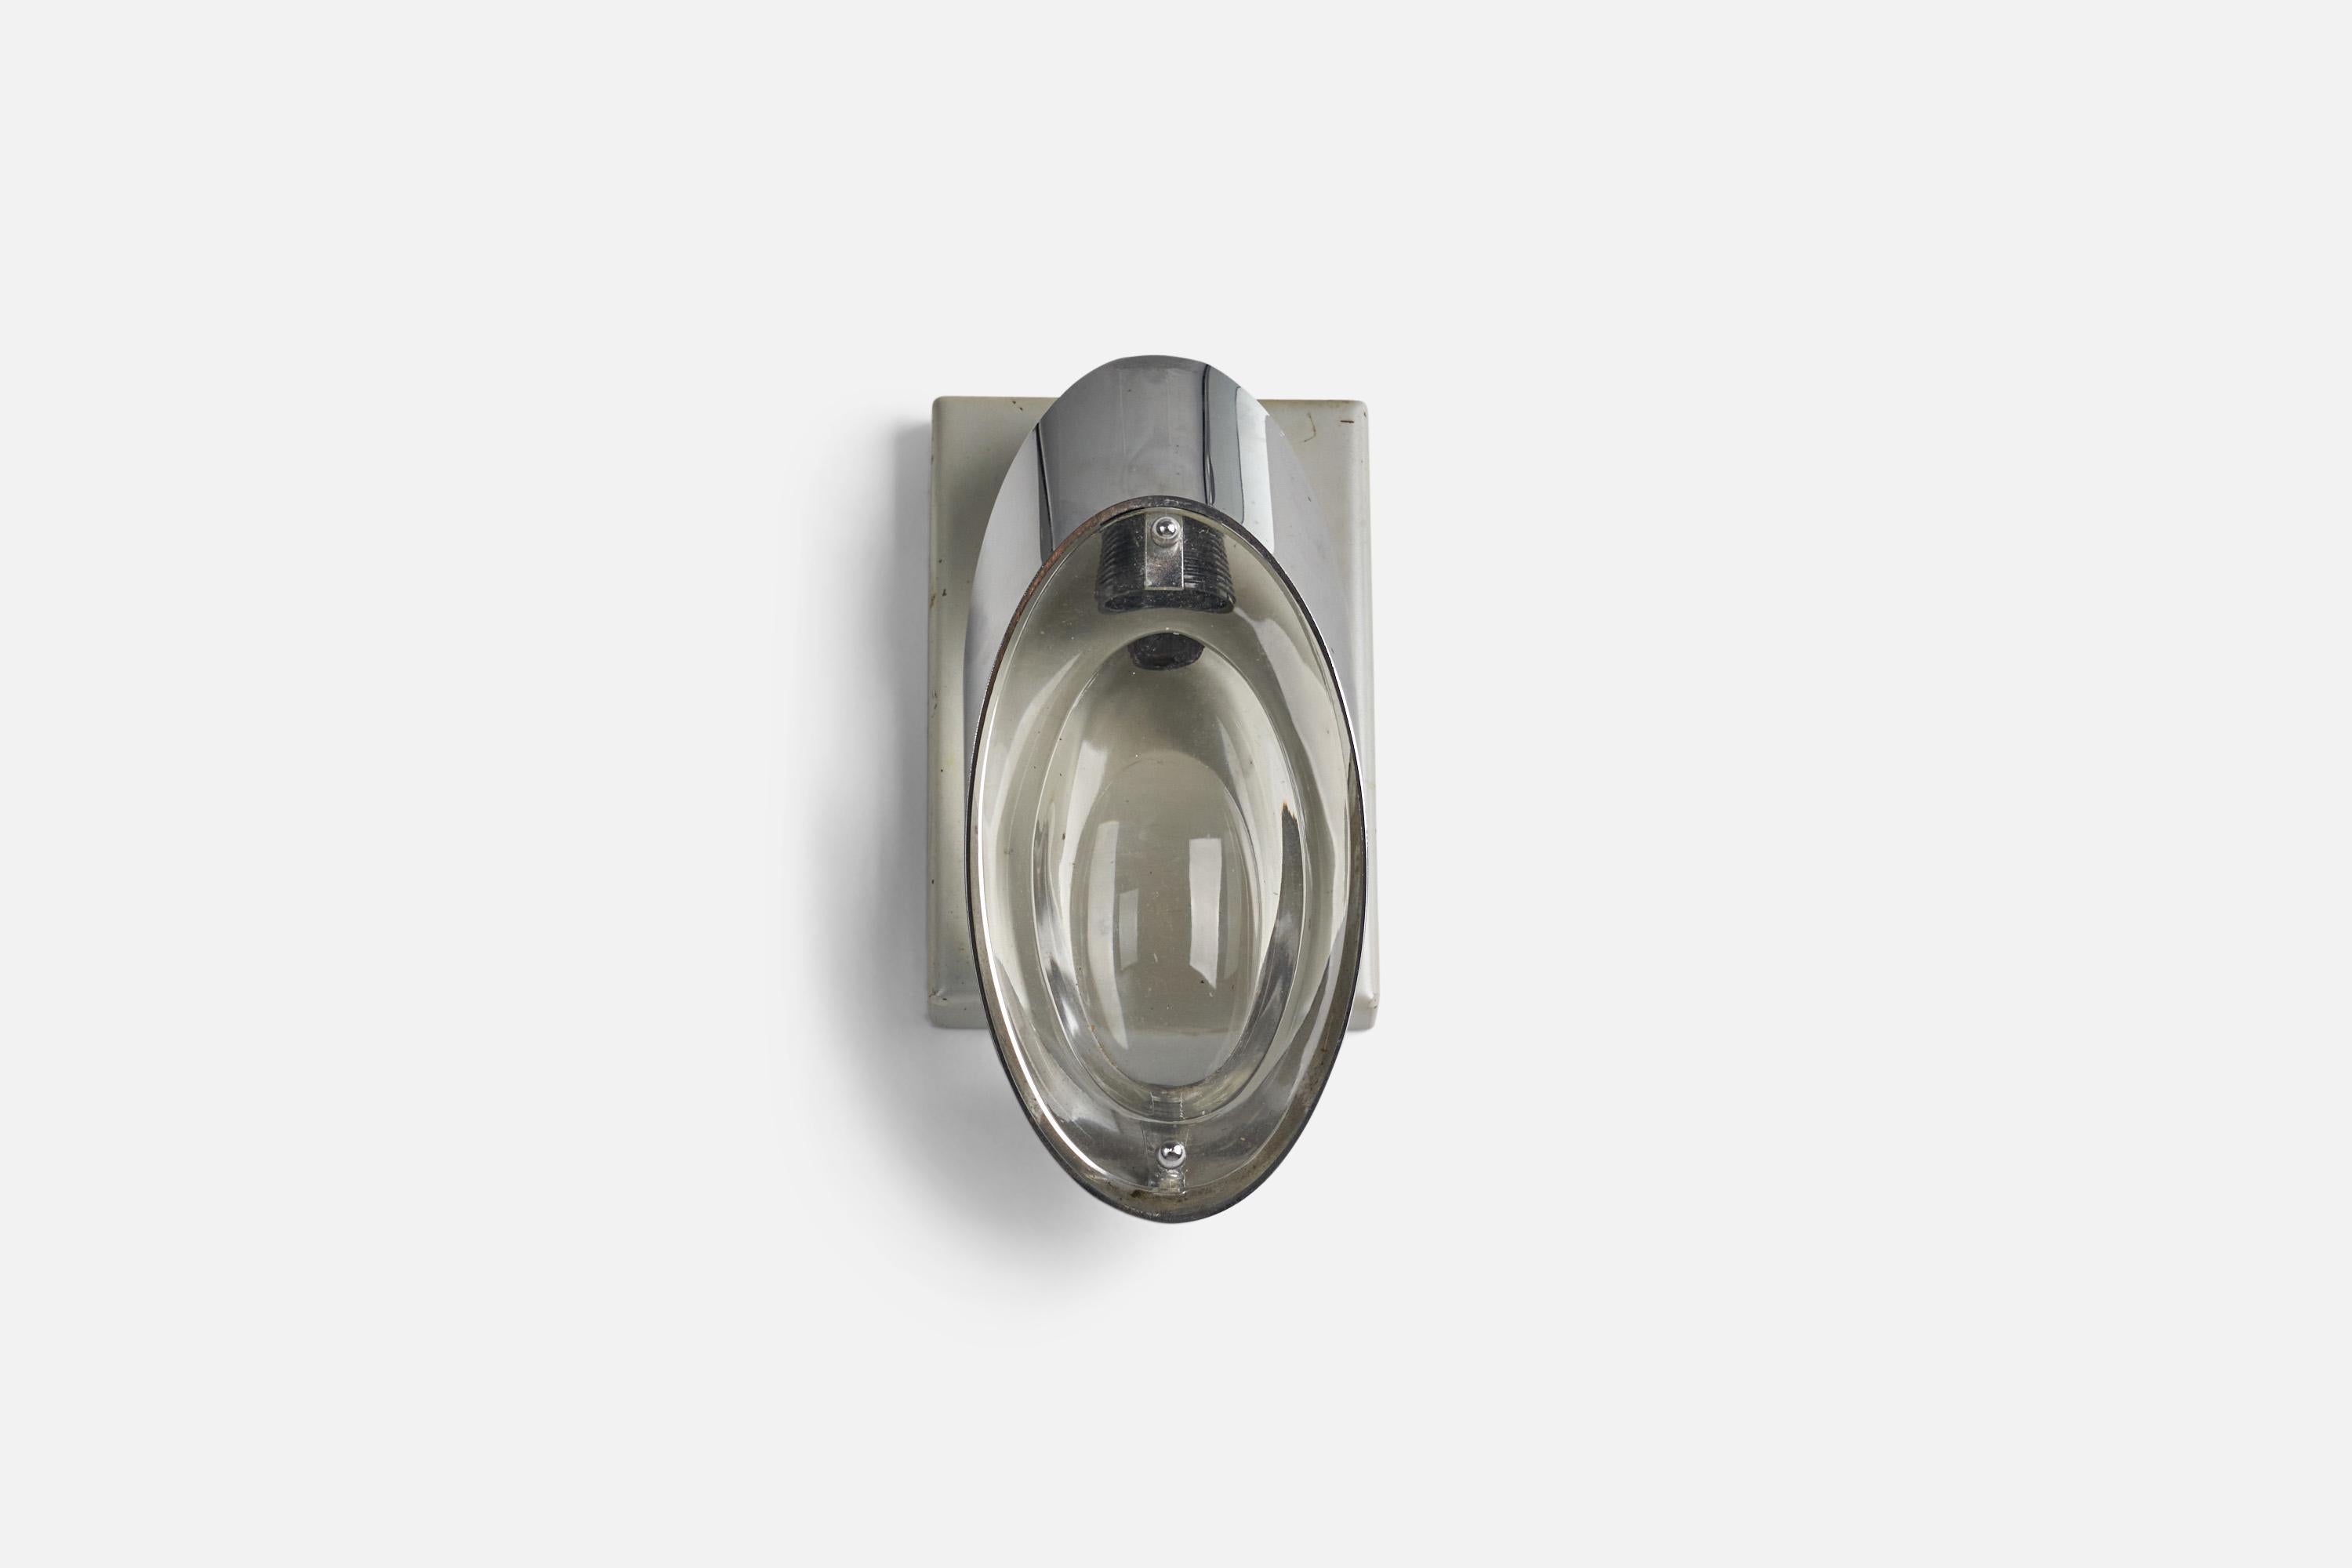 A metal and glass wall light, designed by Oscar Torlasco for Stilkronen, Italy, 1960s.

Socket take E-12 bulbs.

Dimensions of back plate (inches): 6 x 4.06 x 0.68 (height x width x depth)

There is no maximum wattage stated on the fixture.